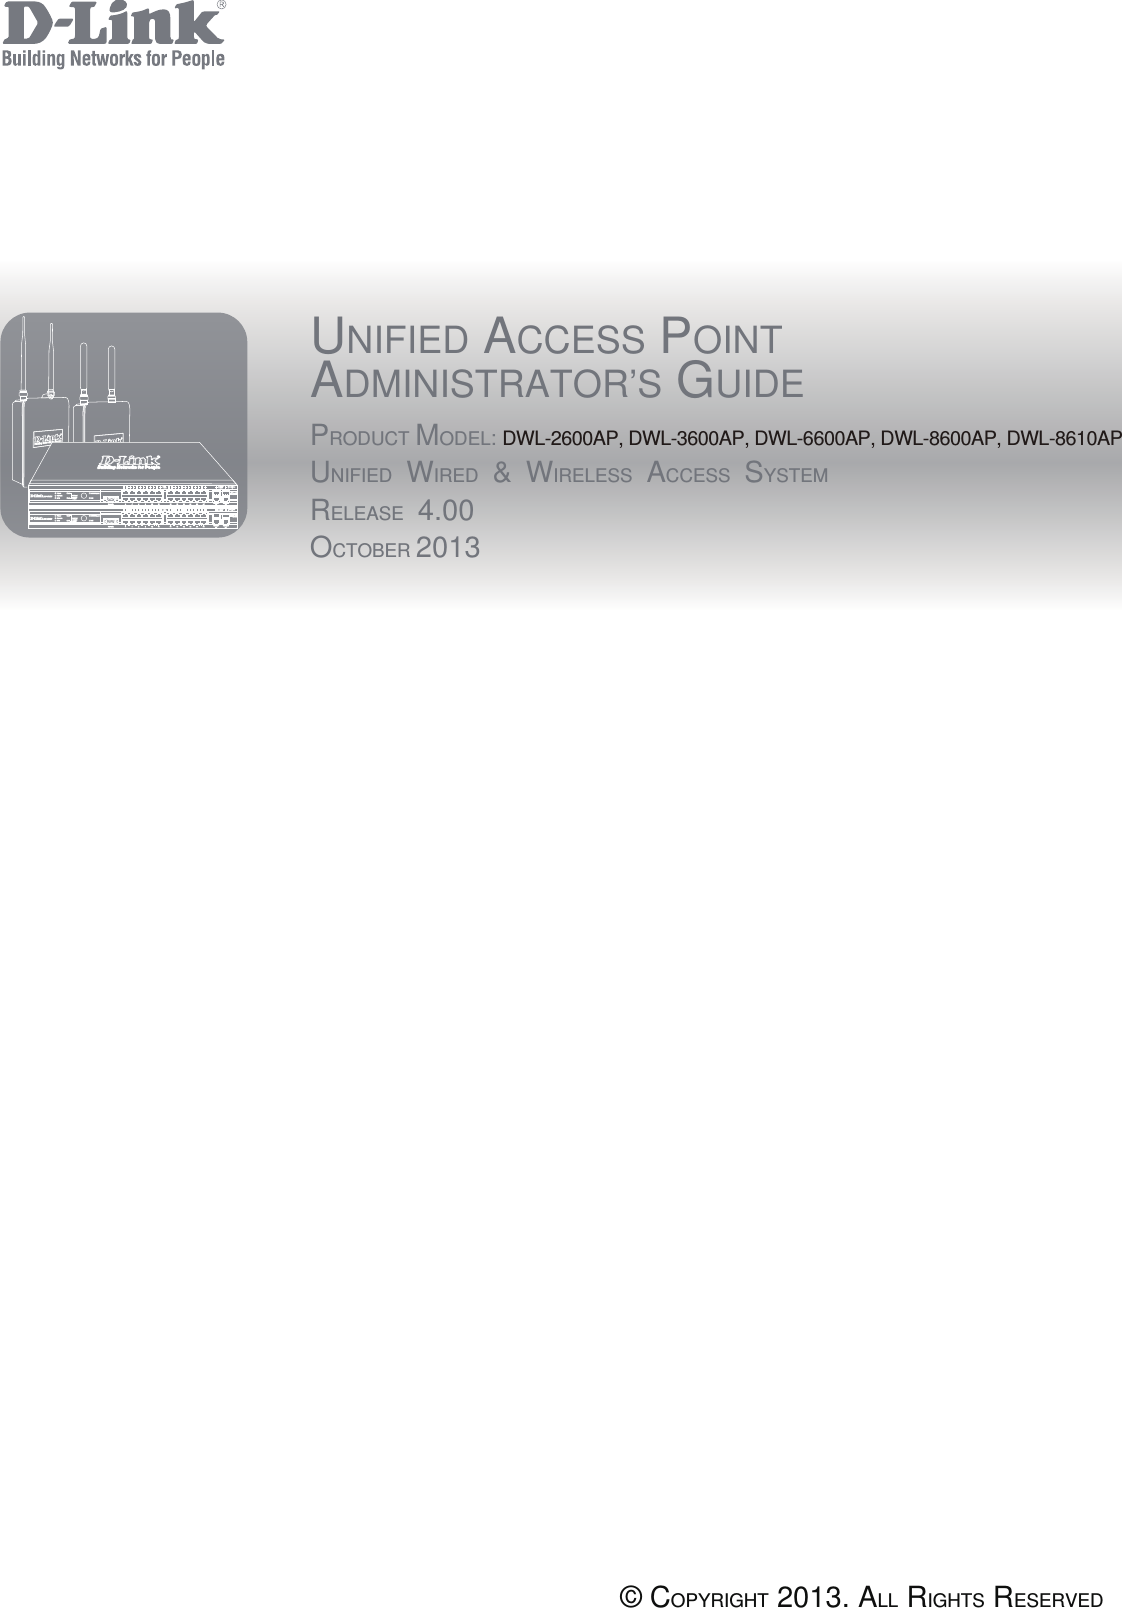 UNIFIED ACCESS POINTADMINISTRATOR’S GUIDEPRODUCT MODEL: DWL-2600AP, DWL-3600AP, DWL-6600AP, DWL-8600AP, DWL-8610APUNIFIED WIRED &amp; WIRELESS ACCESS SYSTEMRELEASE 4.00OCTOBER 2013© COPYRIGHT 2013. ALL RIGHTS RESERVED